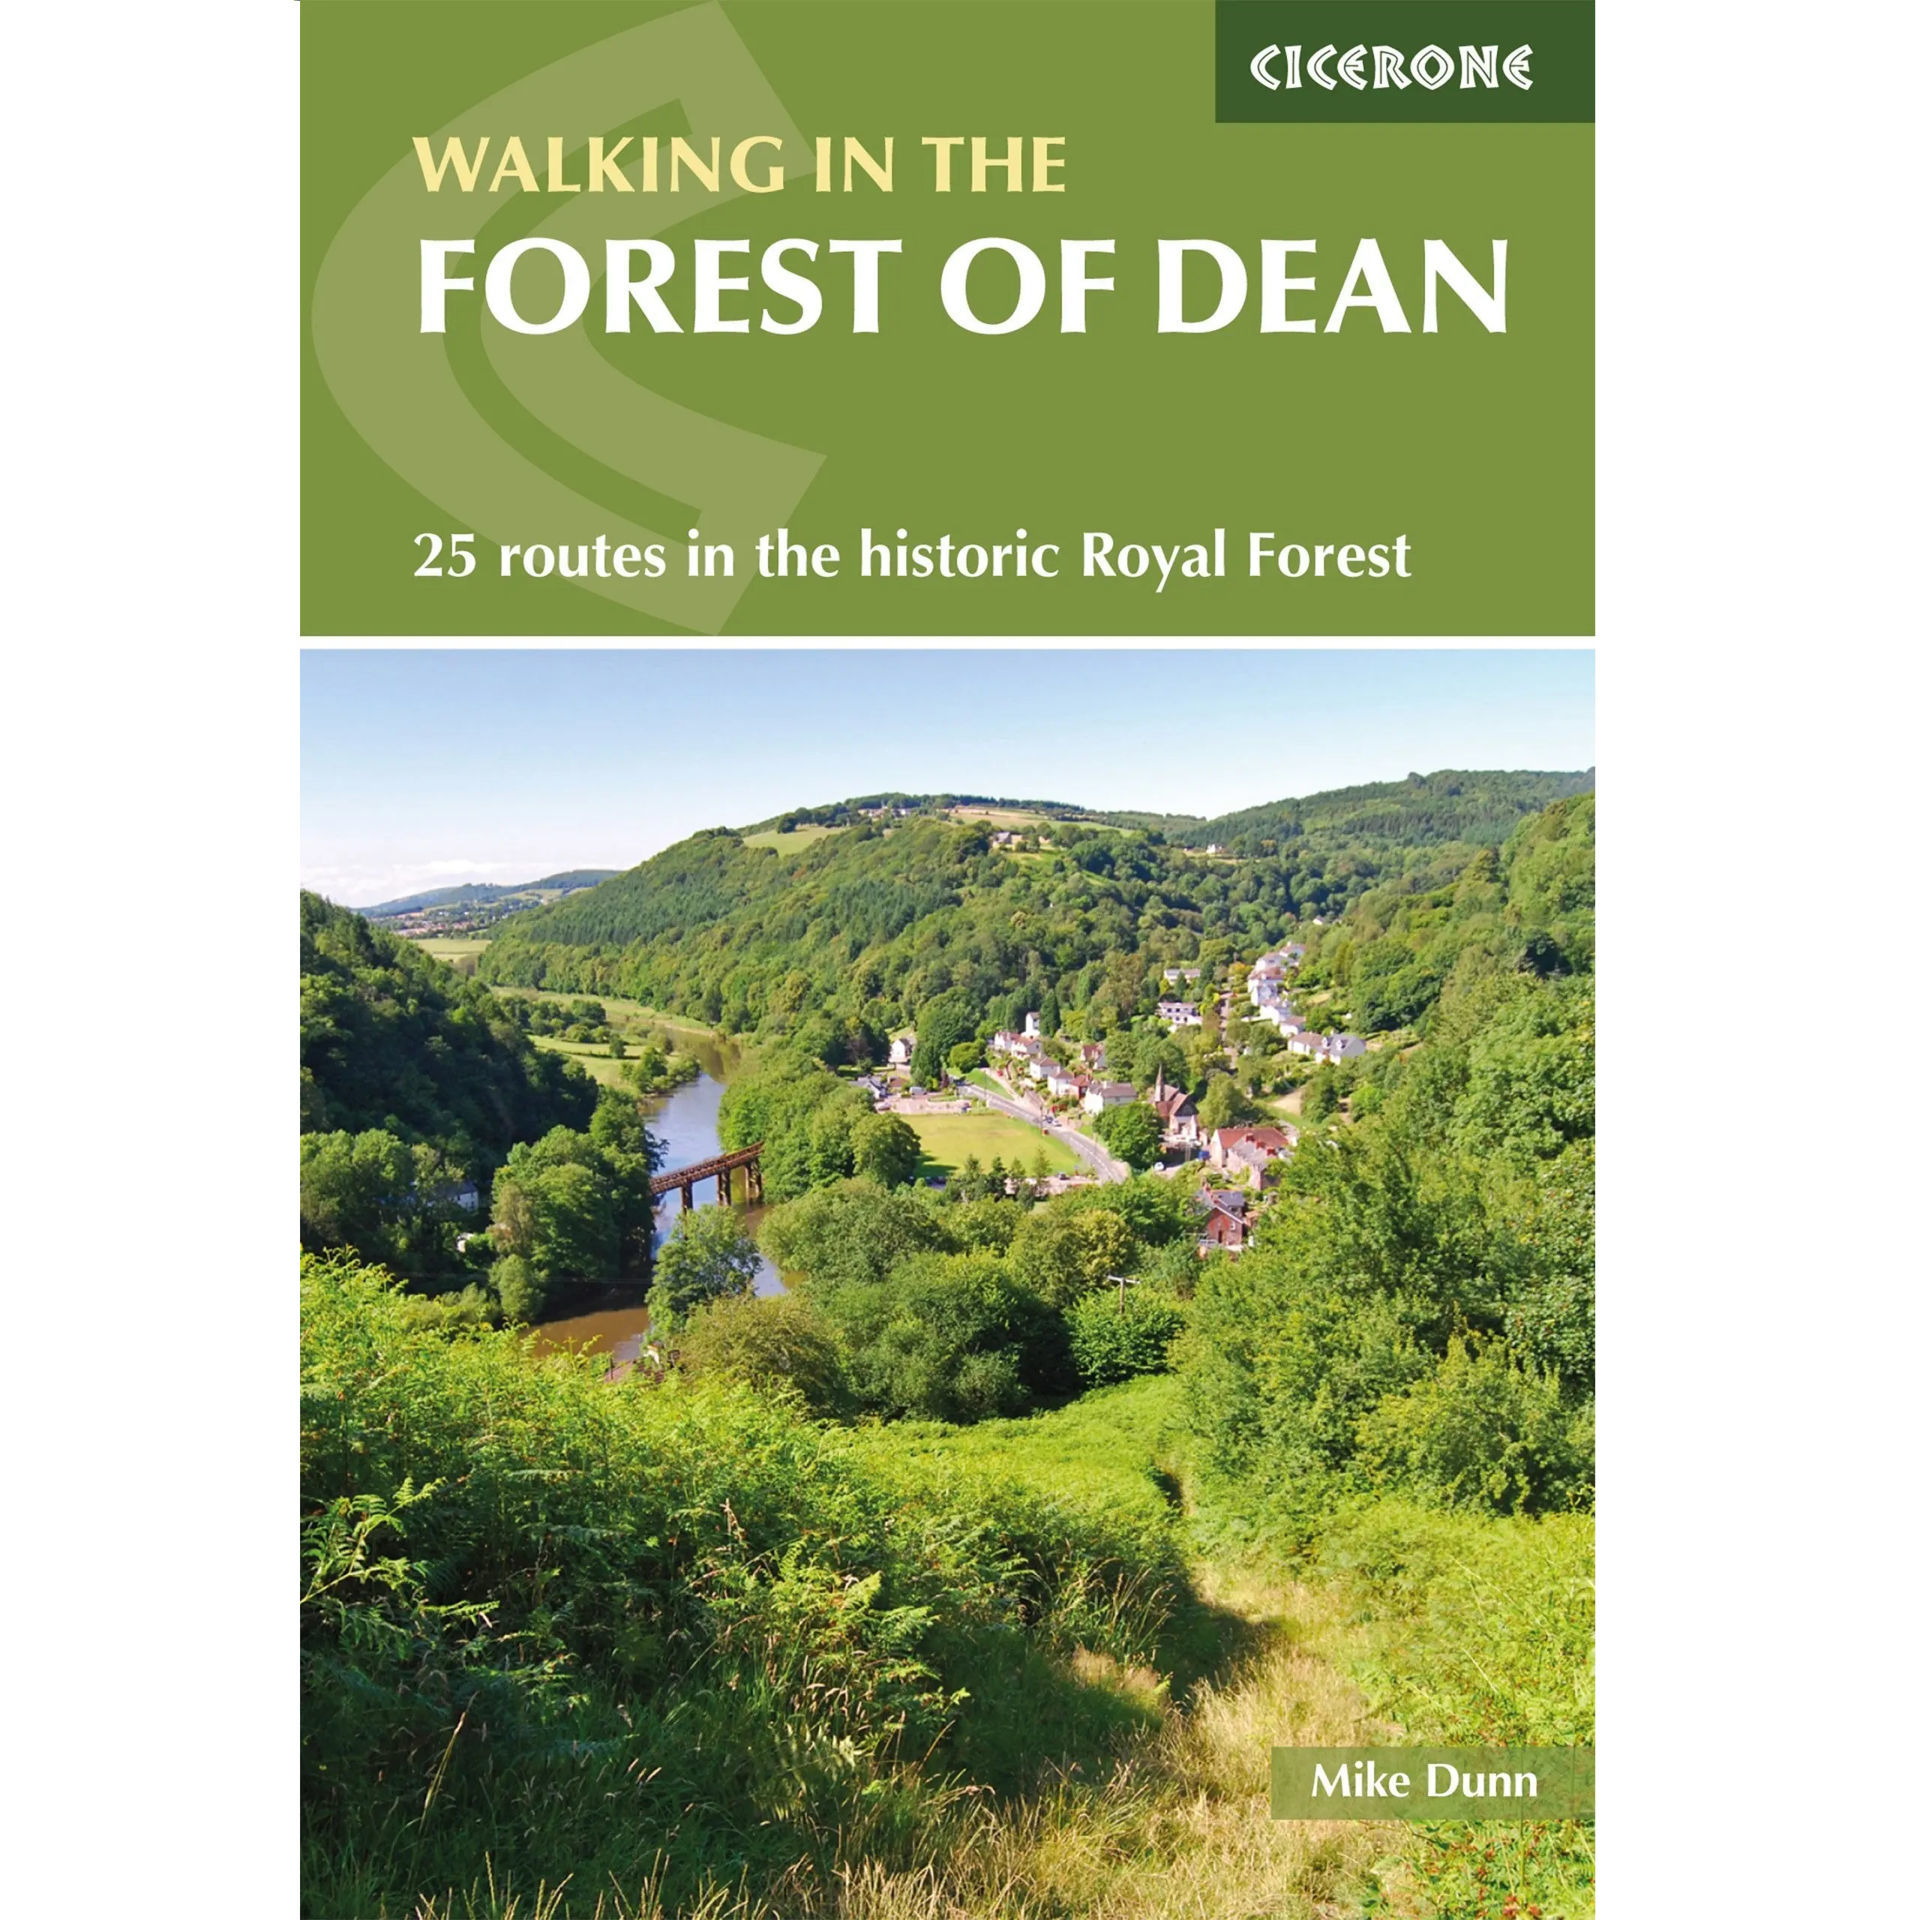 Cicerone Walking in the Forest of Dean - 25 Routes in the Historic Royal Forest